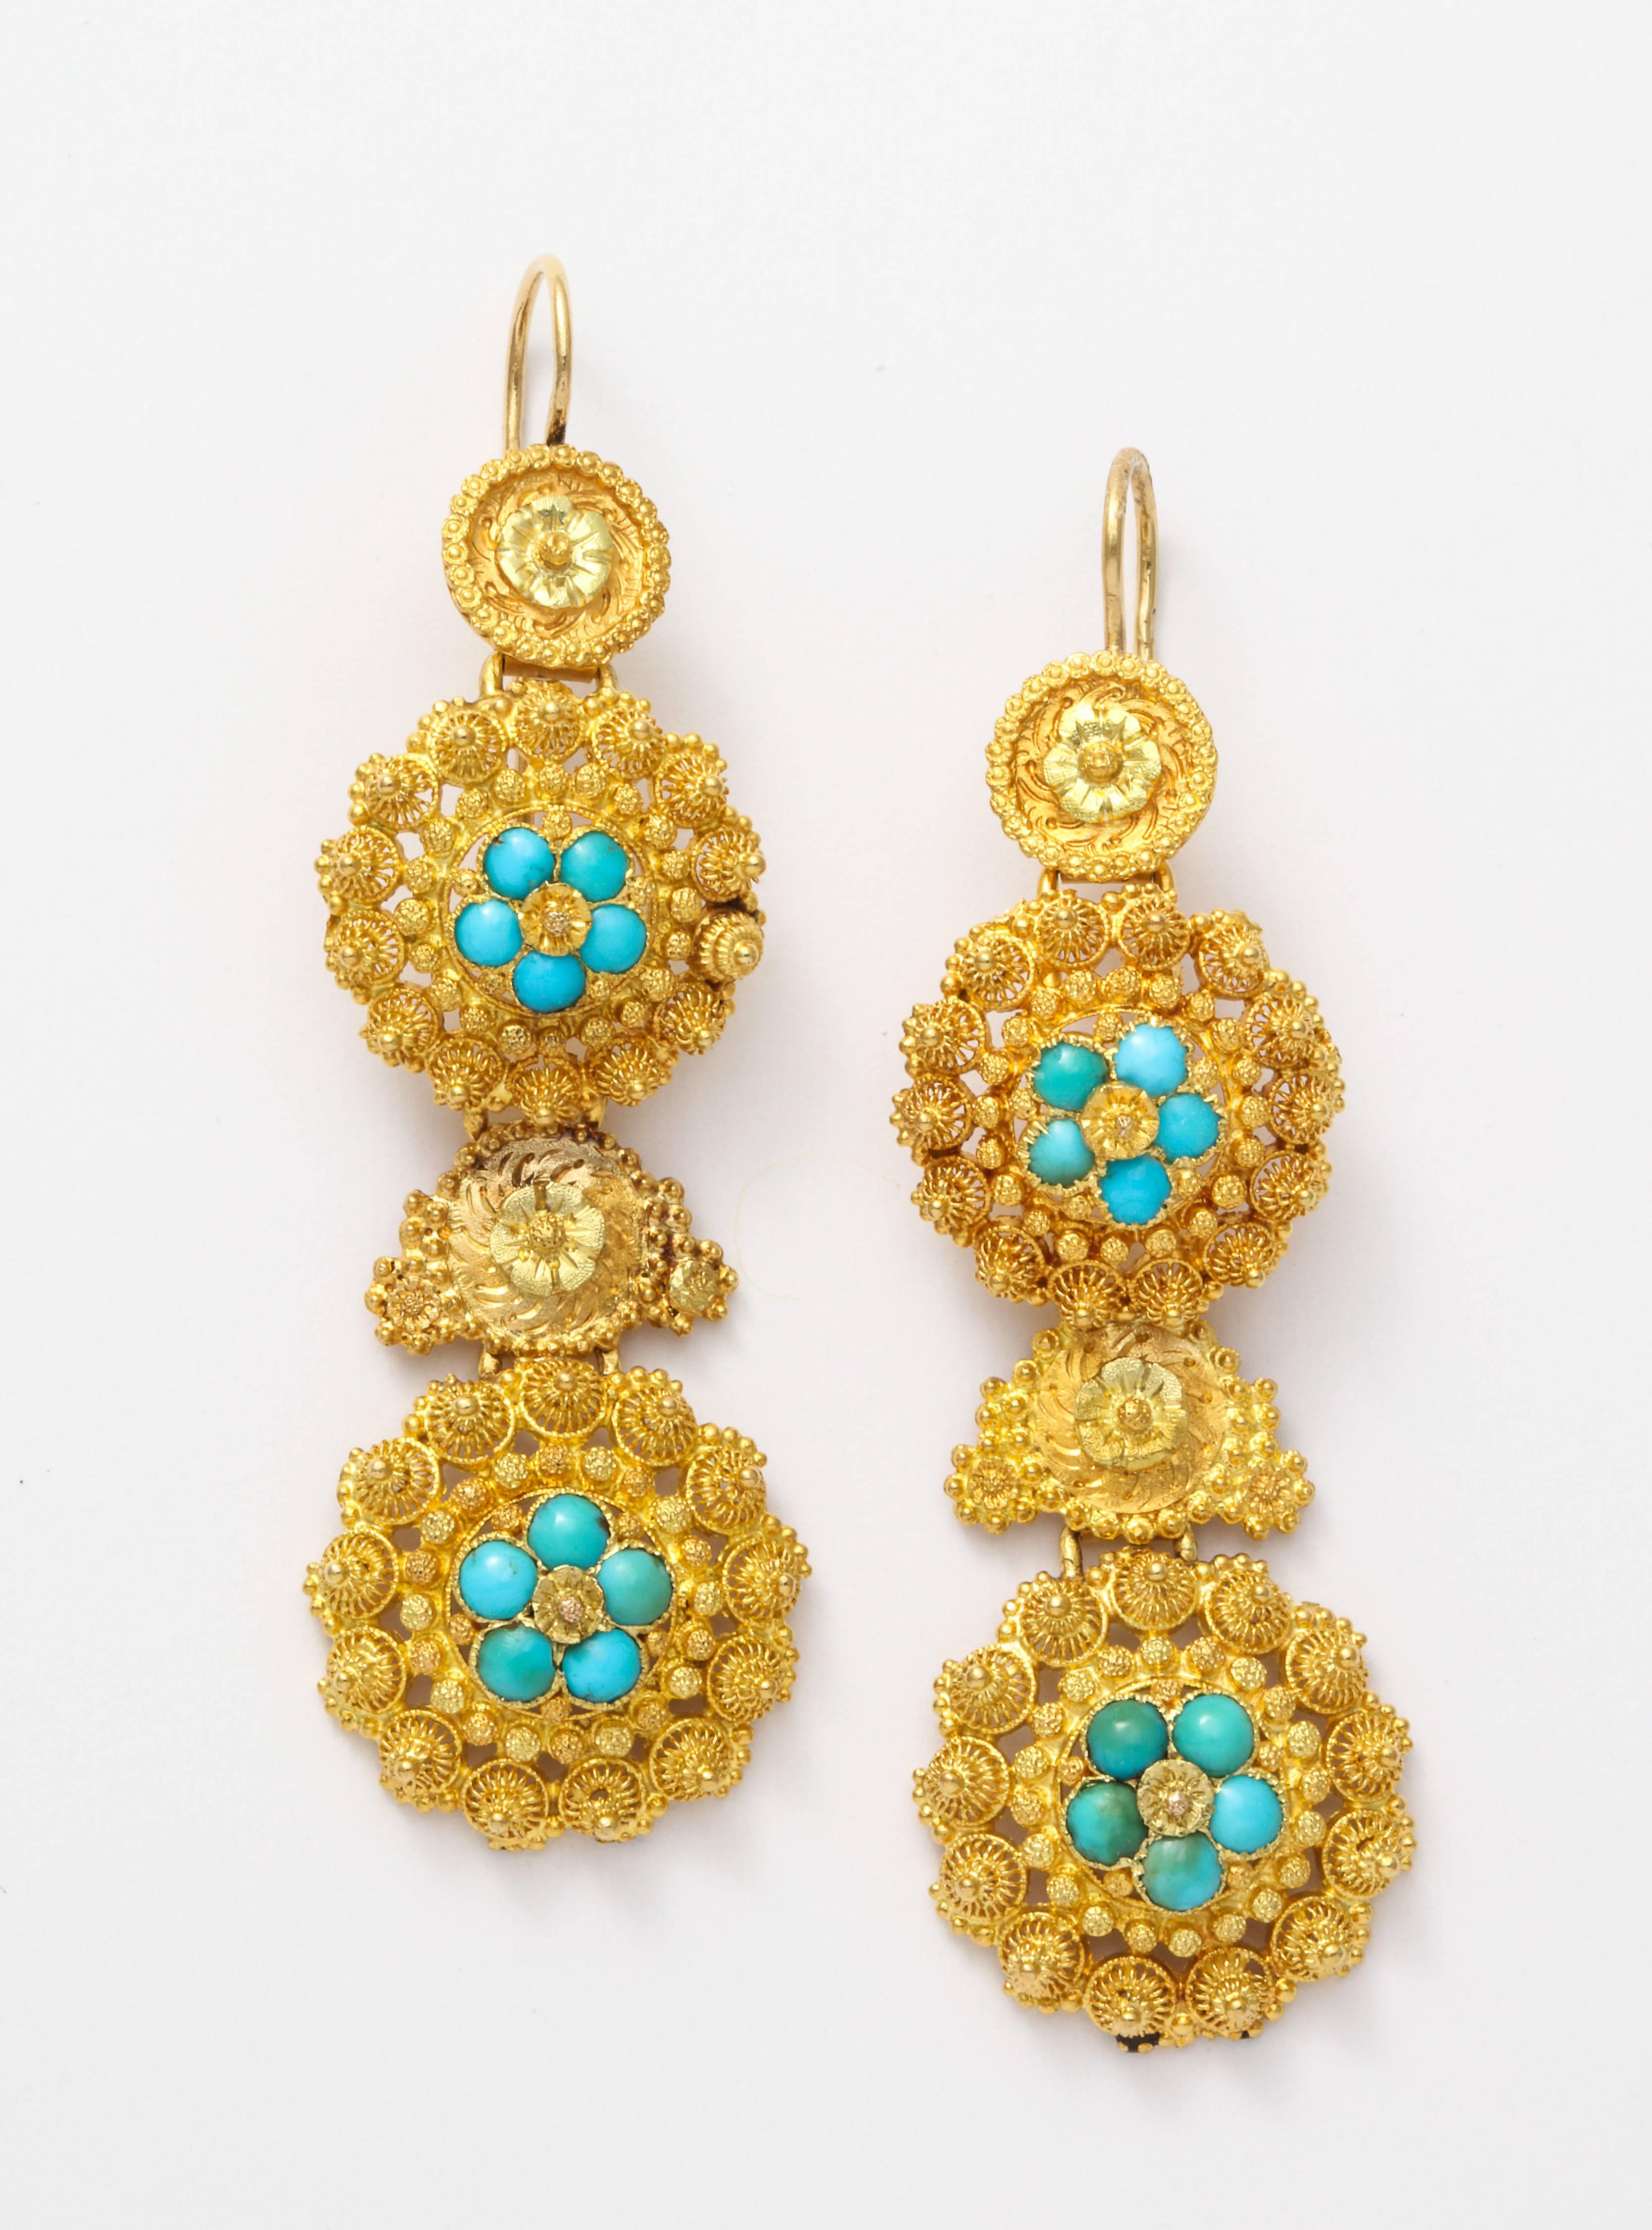 Fine cannetille work forms tight spirals in 18 kt gold that is punctuated with granulation and natural turquoise. There are four sections to these earrings and all are original to the 1840 construction. They are light on the ear. These are a